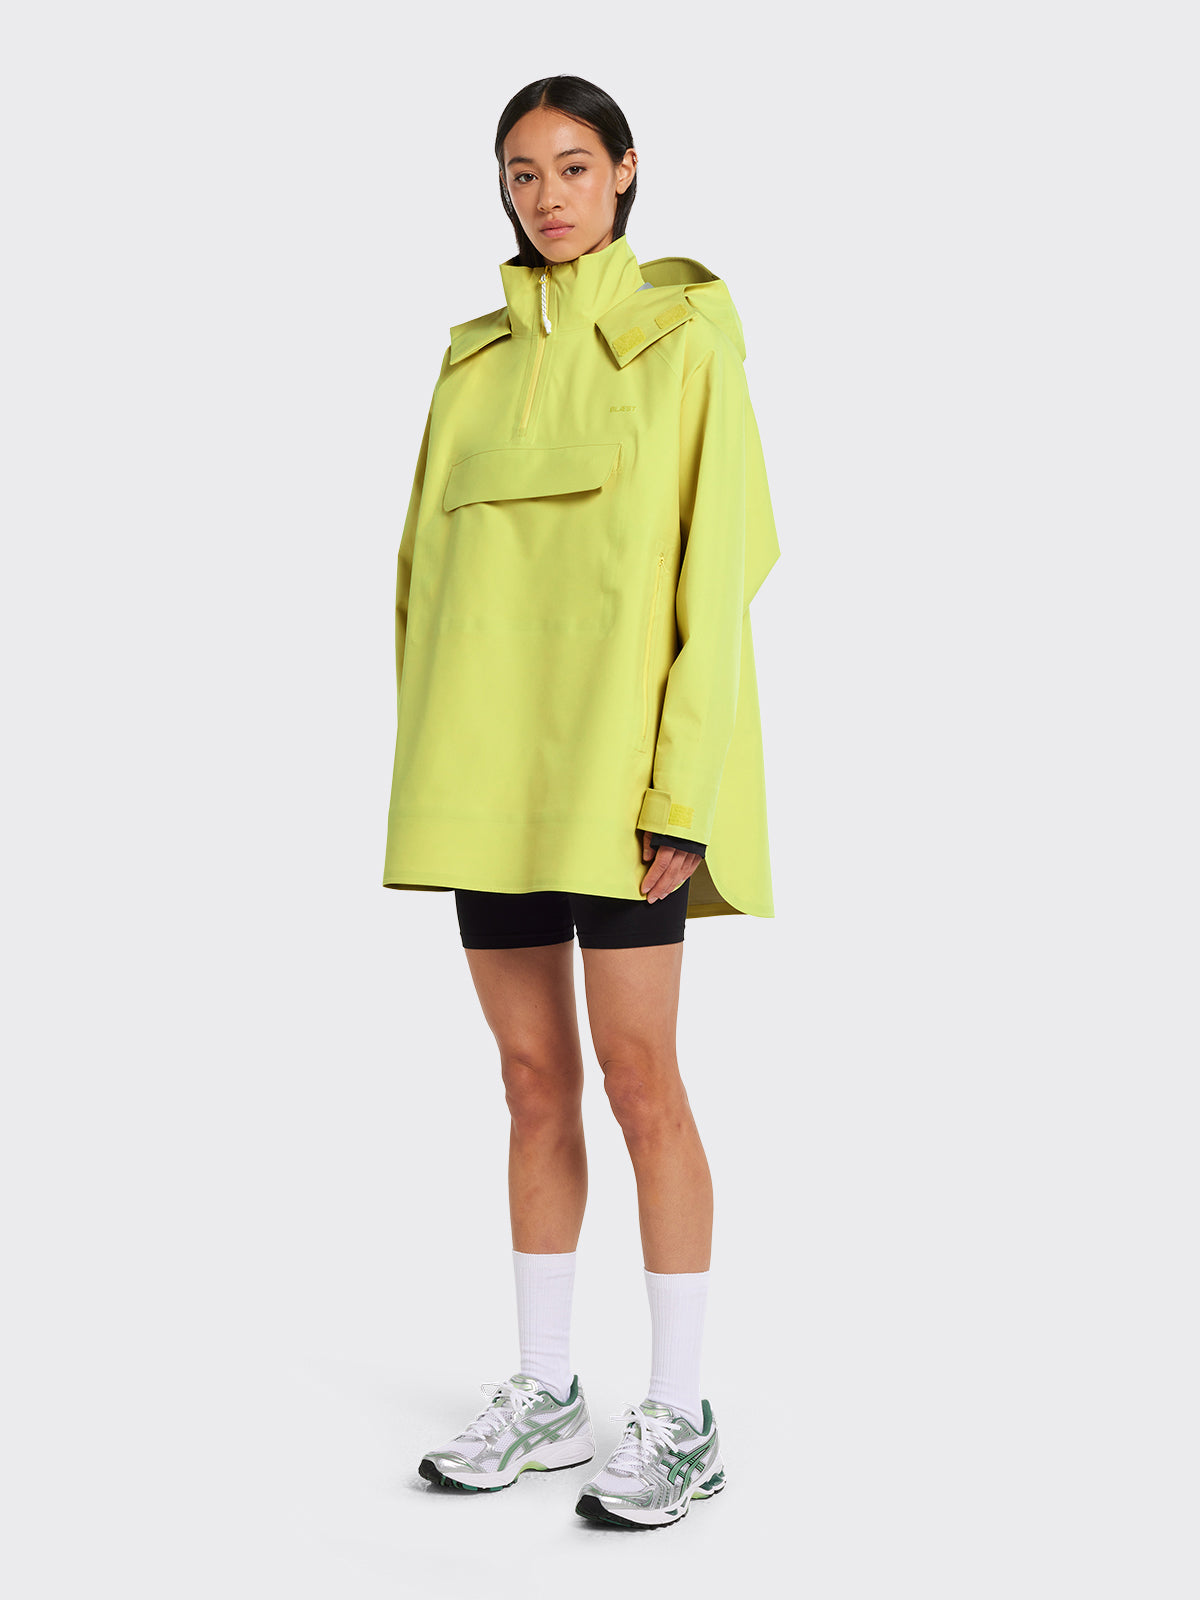 Woman wearing Voss poncho in the color Muted Lime by Blæst